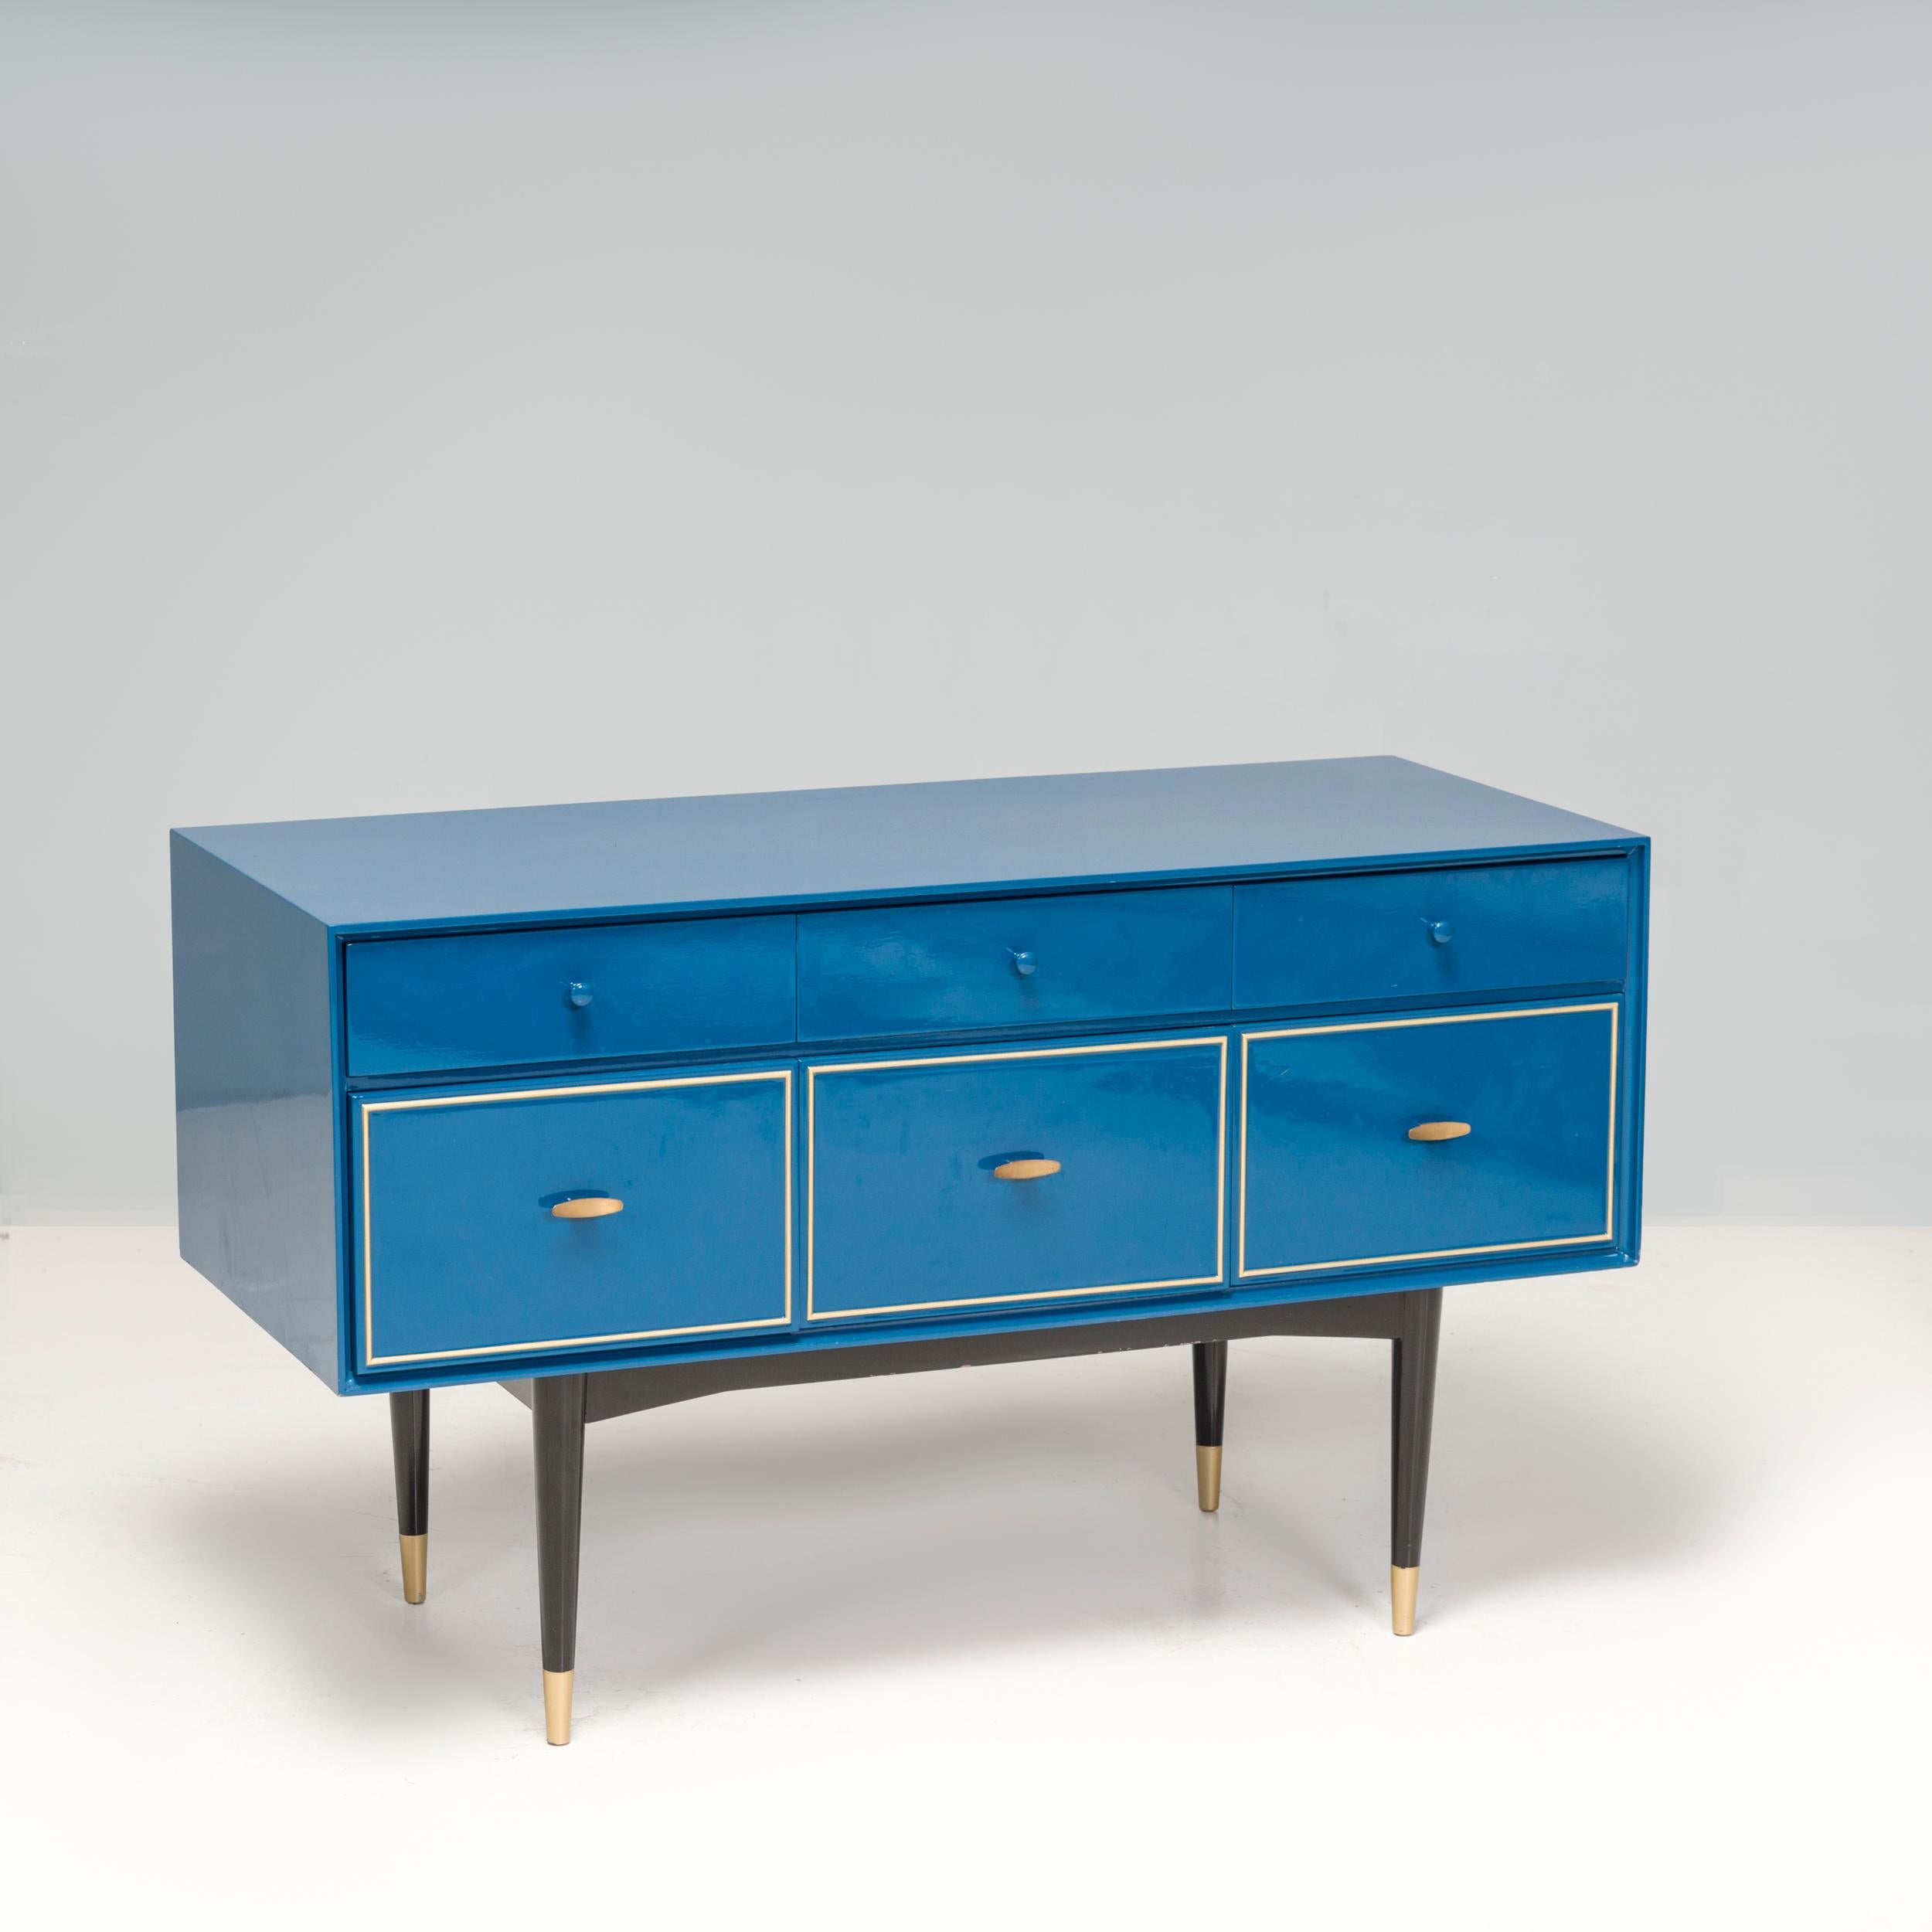 This blue 1960s chest of drawers would add a distinctive flare of colour to any living space, brightening up the room. It offers a contemporary update on a mid-century traditional design, with a unique asymmetric feel due to the support frame being